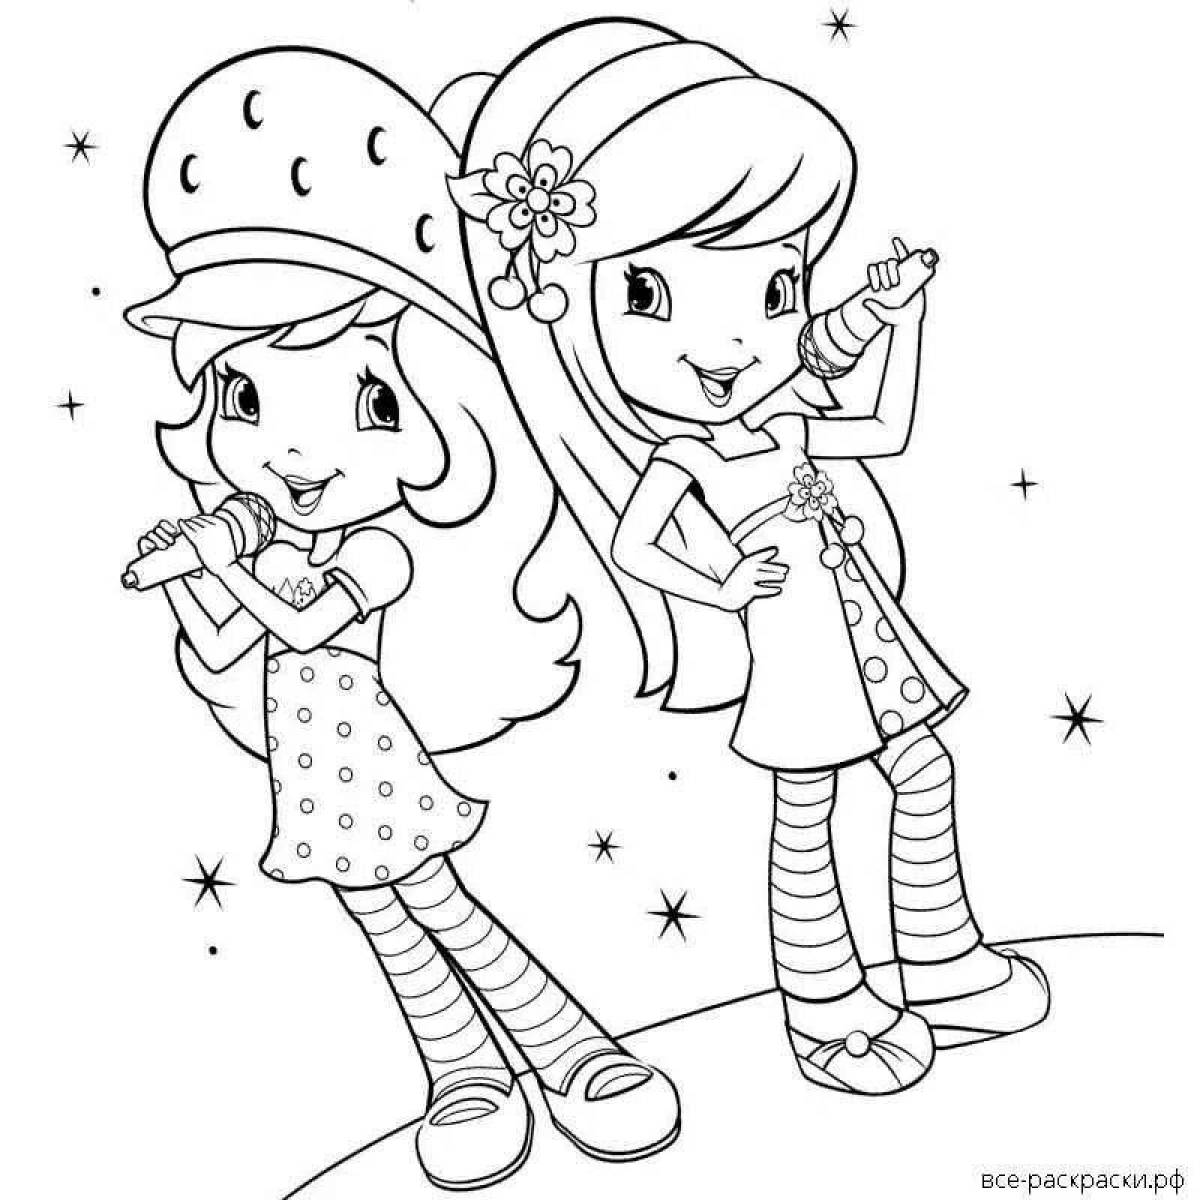 Colorful girlfriends coloring pages